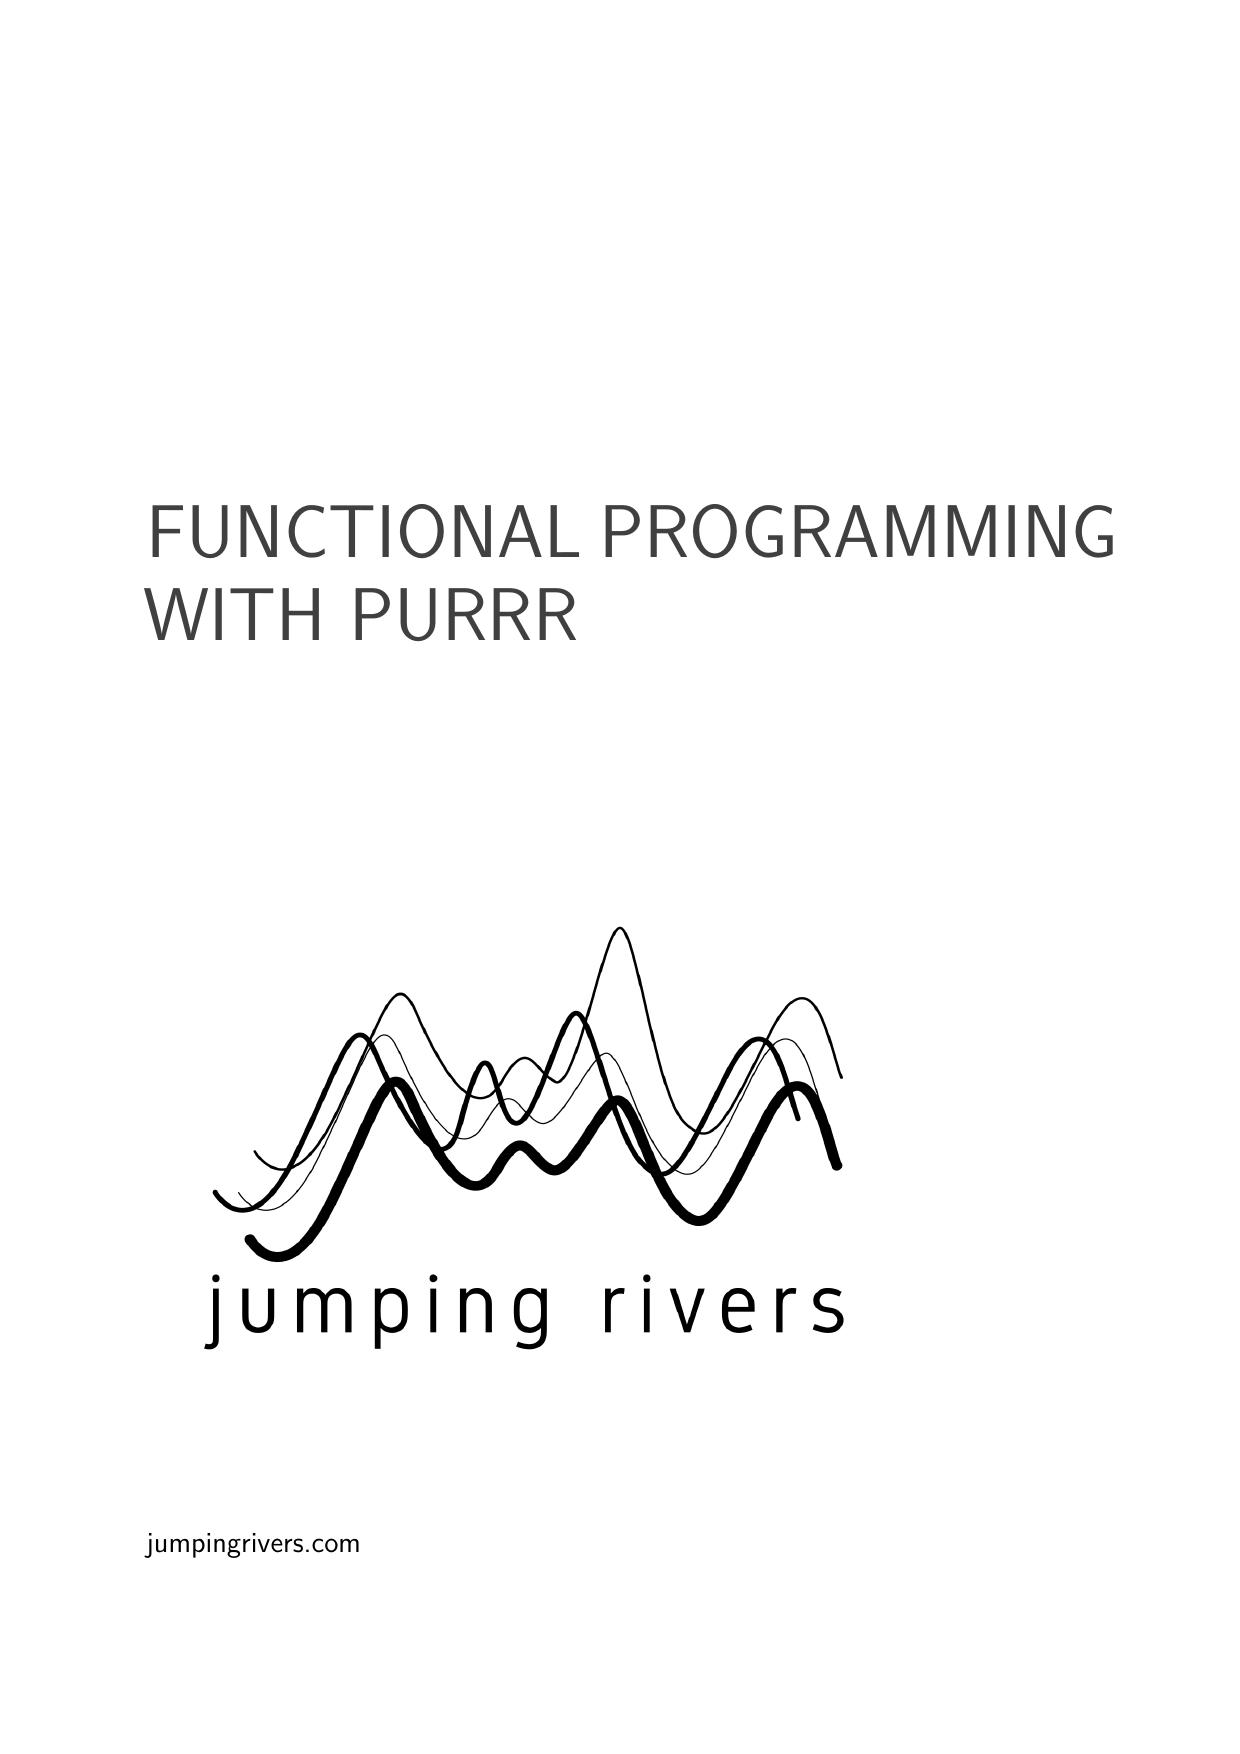 Page 1 of example course material for Functional Programming with purrr